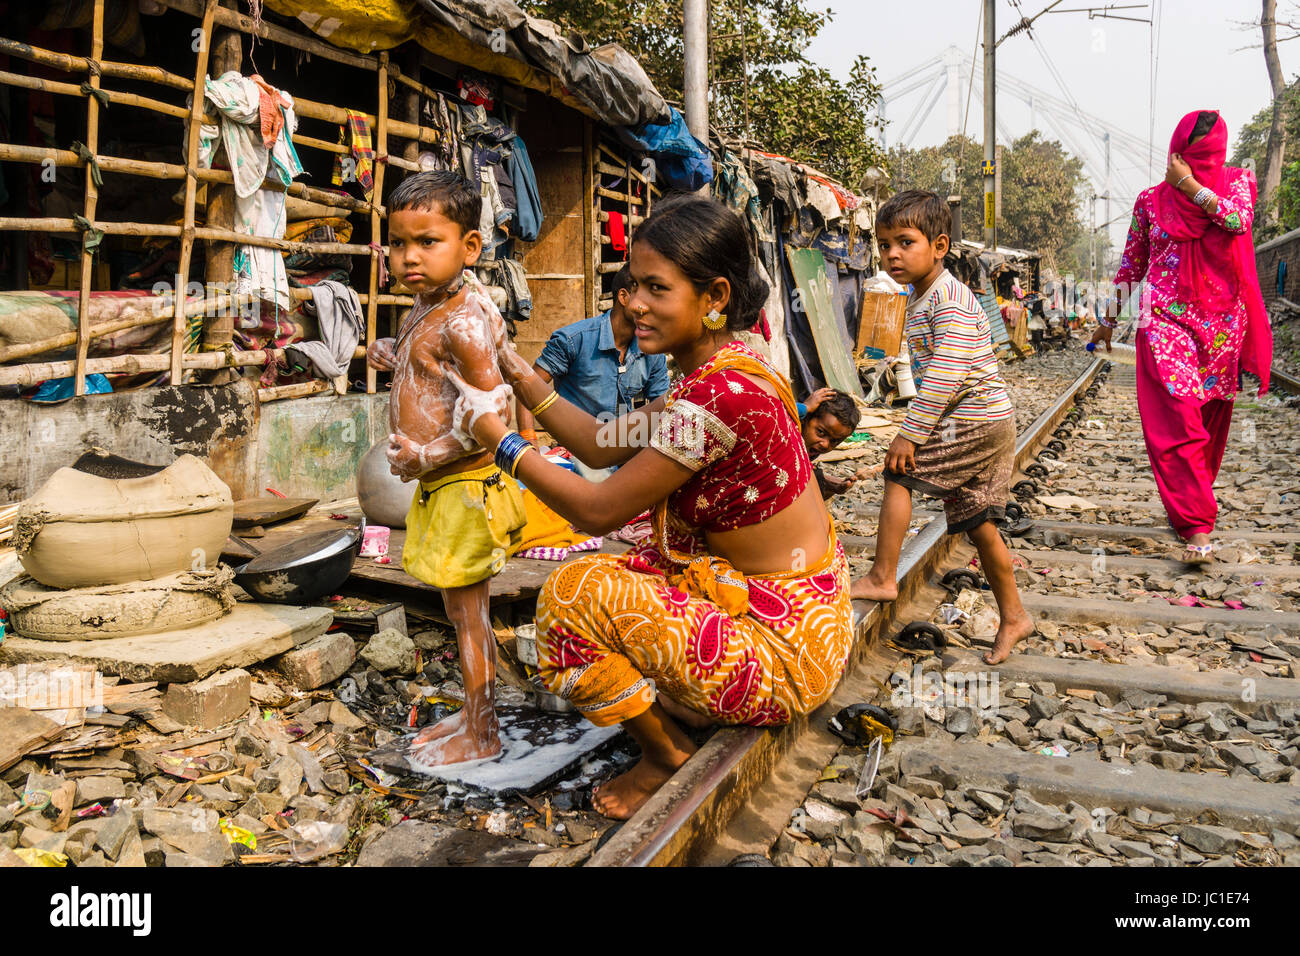 The dwellings and huts in China Bazar slum area are located right next to  the railroad tracks, people are sitting on the tracks Stock Photo - Alamy